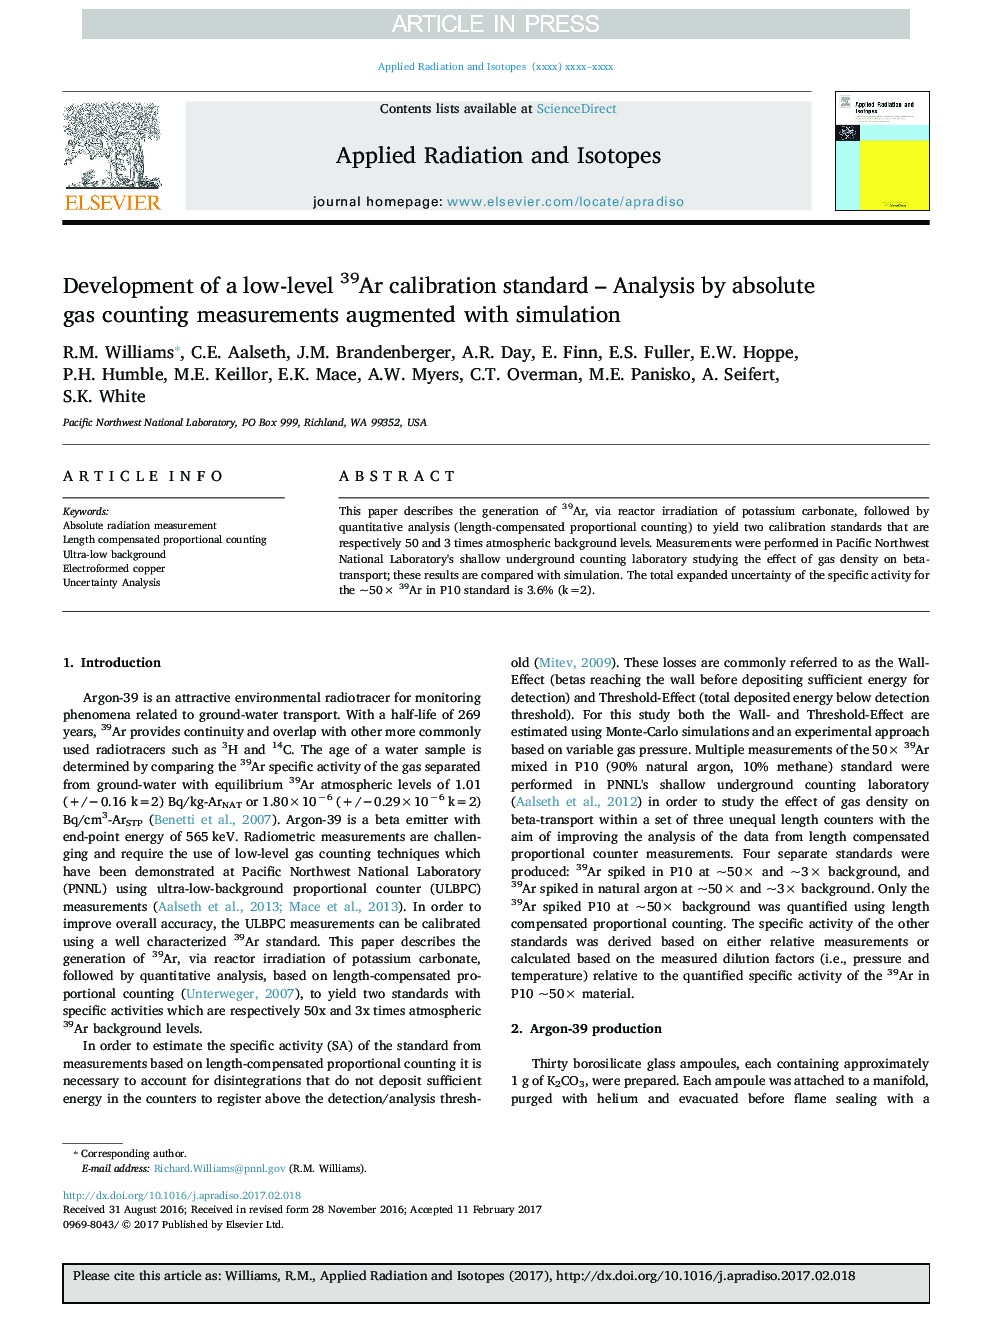 Development of a low-level 39Ar calibration standard - Analysis by absolute gas counting measurements augmented with simulation